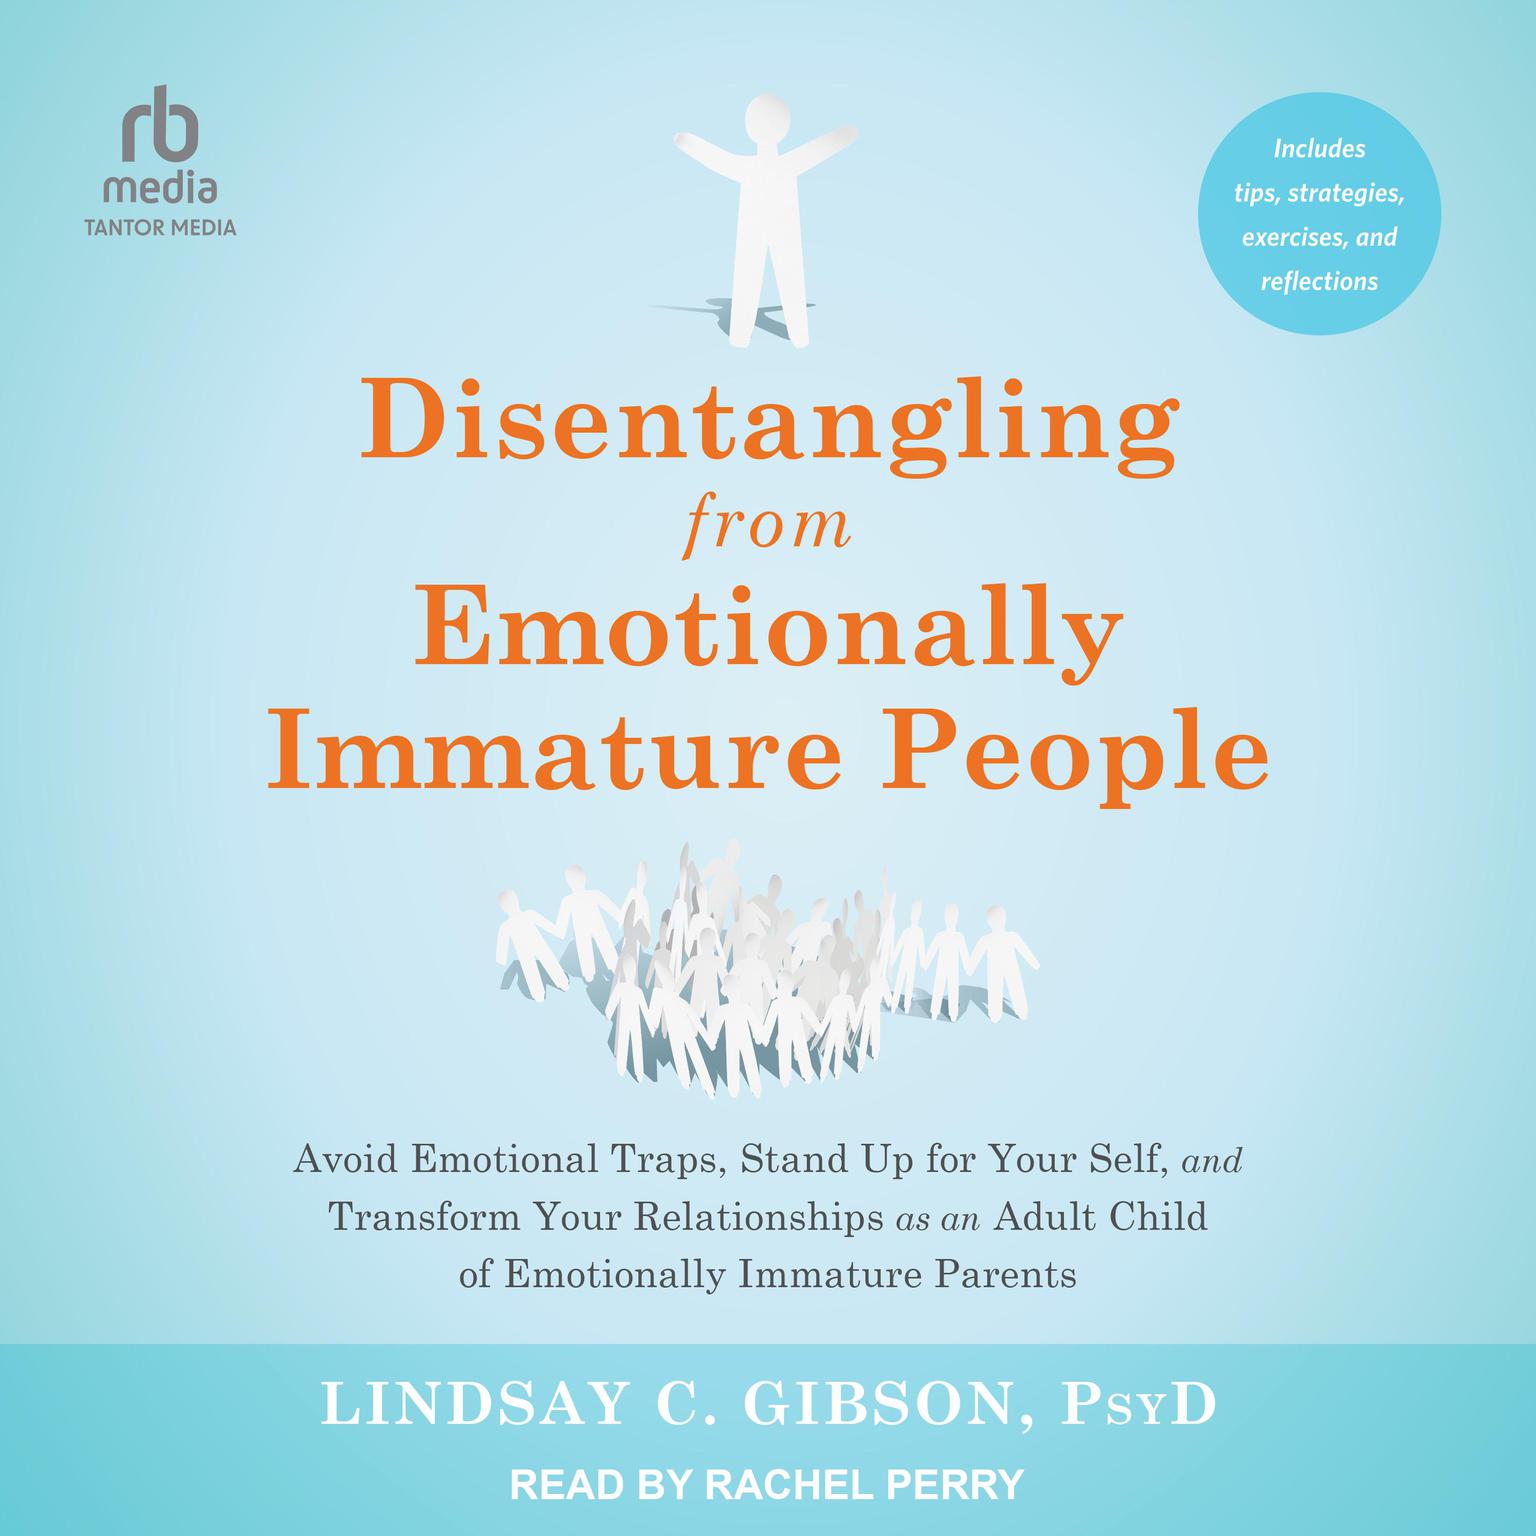 Disentangling from Emotionally Immature People: Avoid Emotional Traps, Stand Up for Your Self, and Transform Your Relationships as an Adult Child of Emotionally Immature Parents Audiobook, by Lindsay C. Gibson